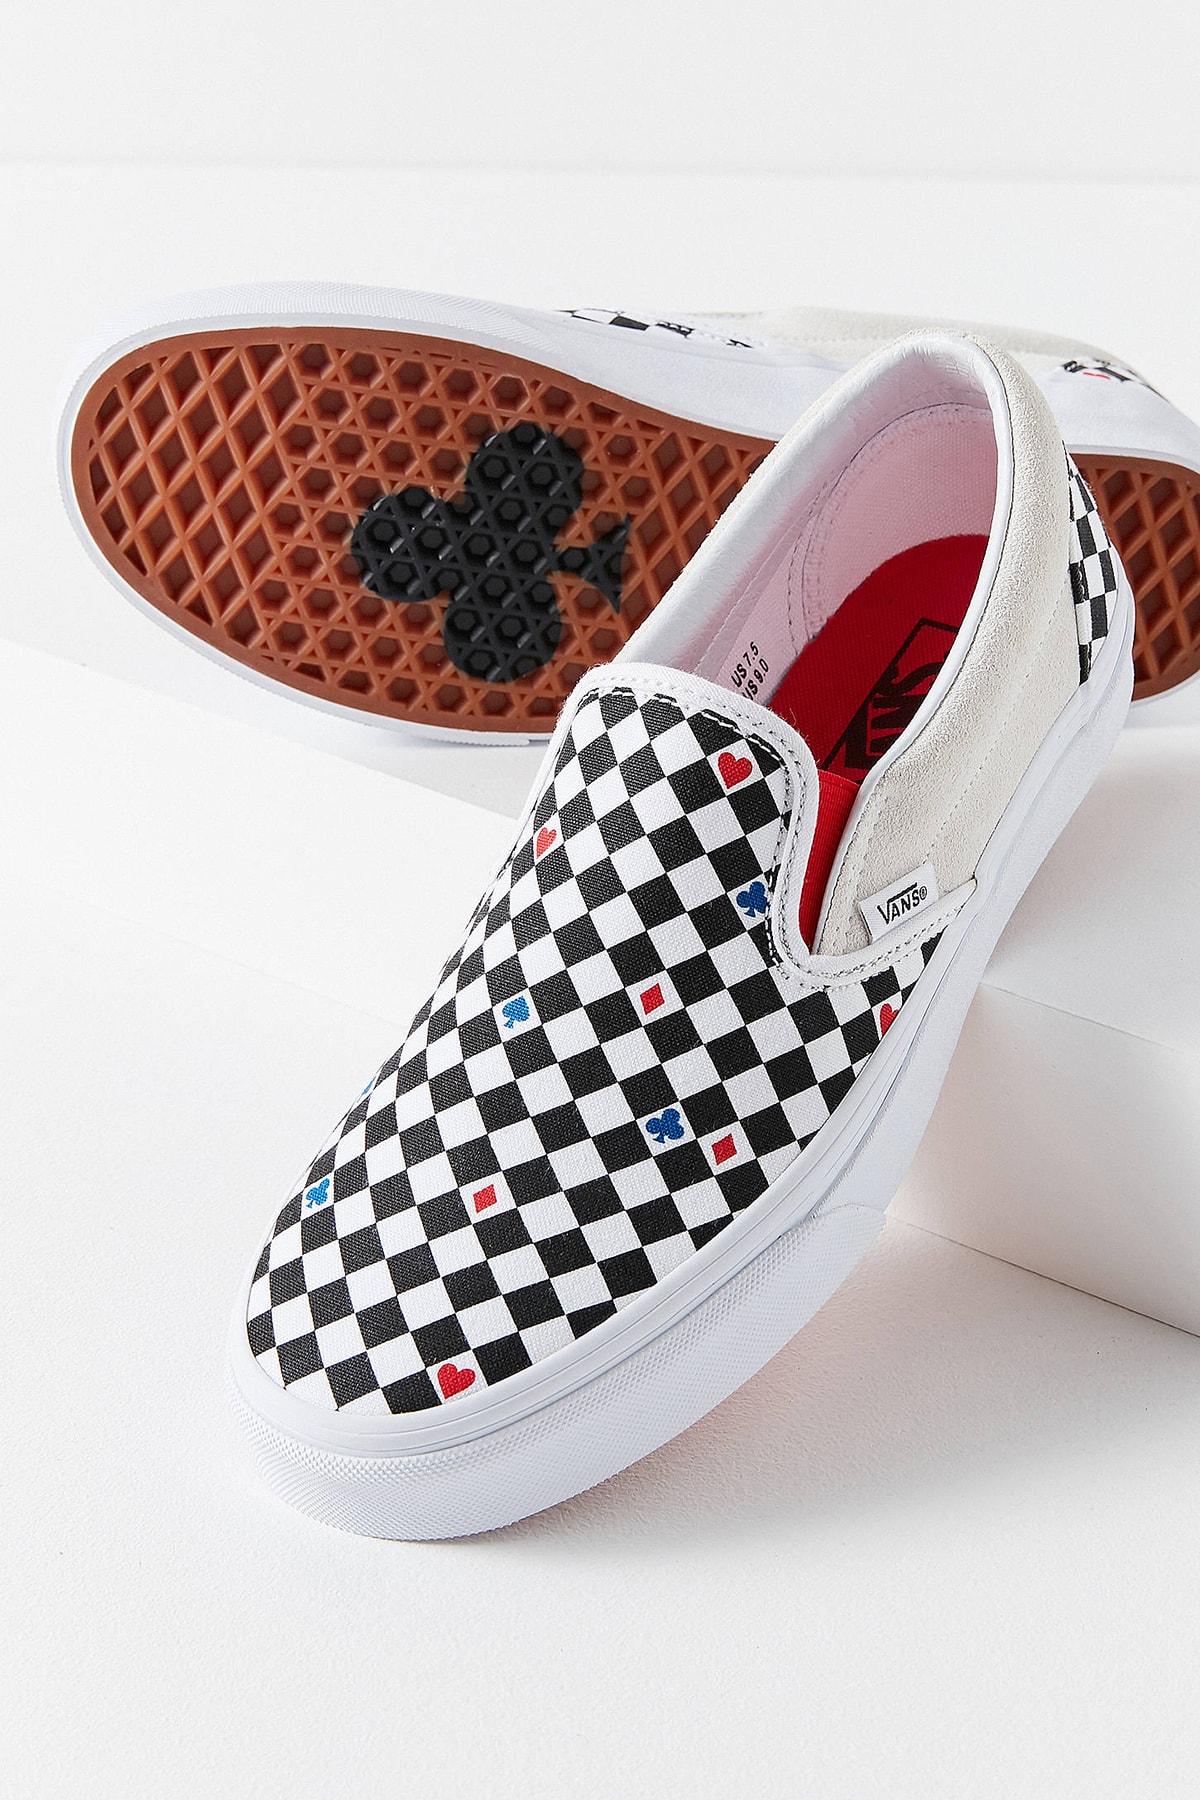 Vans x Urban Outfitters Playing Cards Sneakers | Hypebae